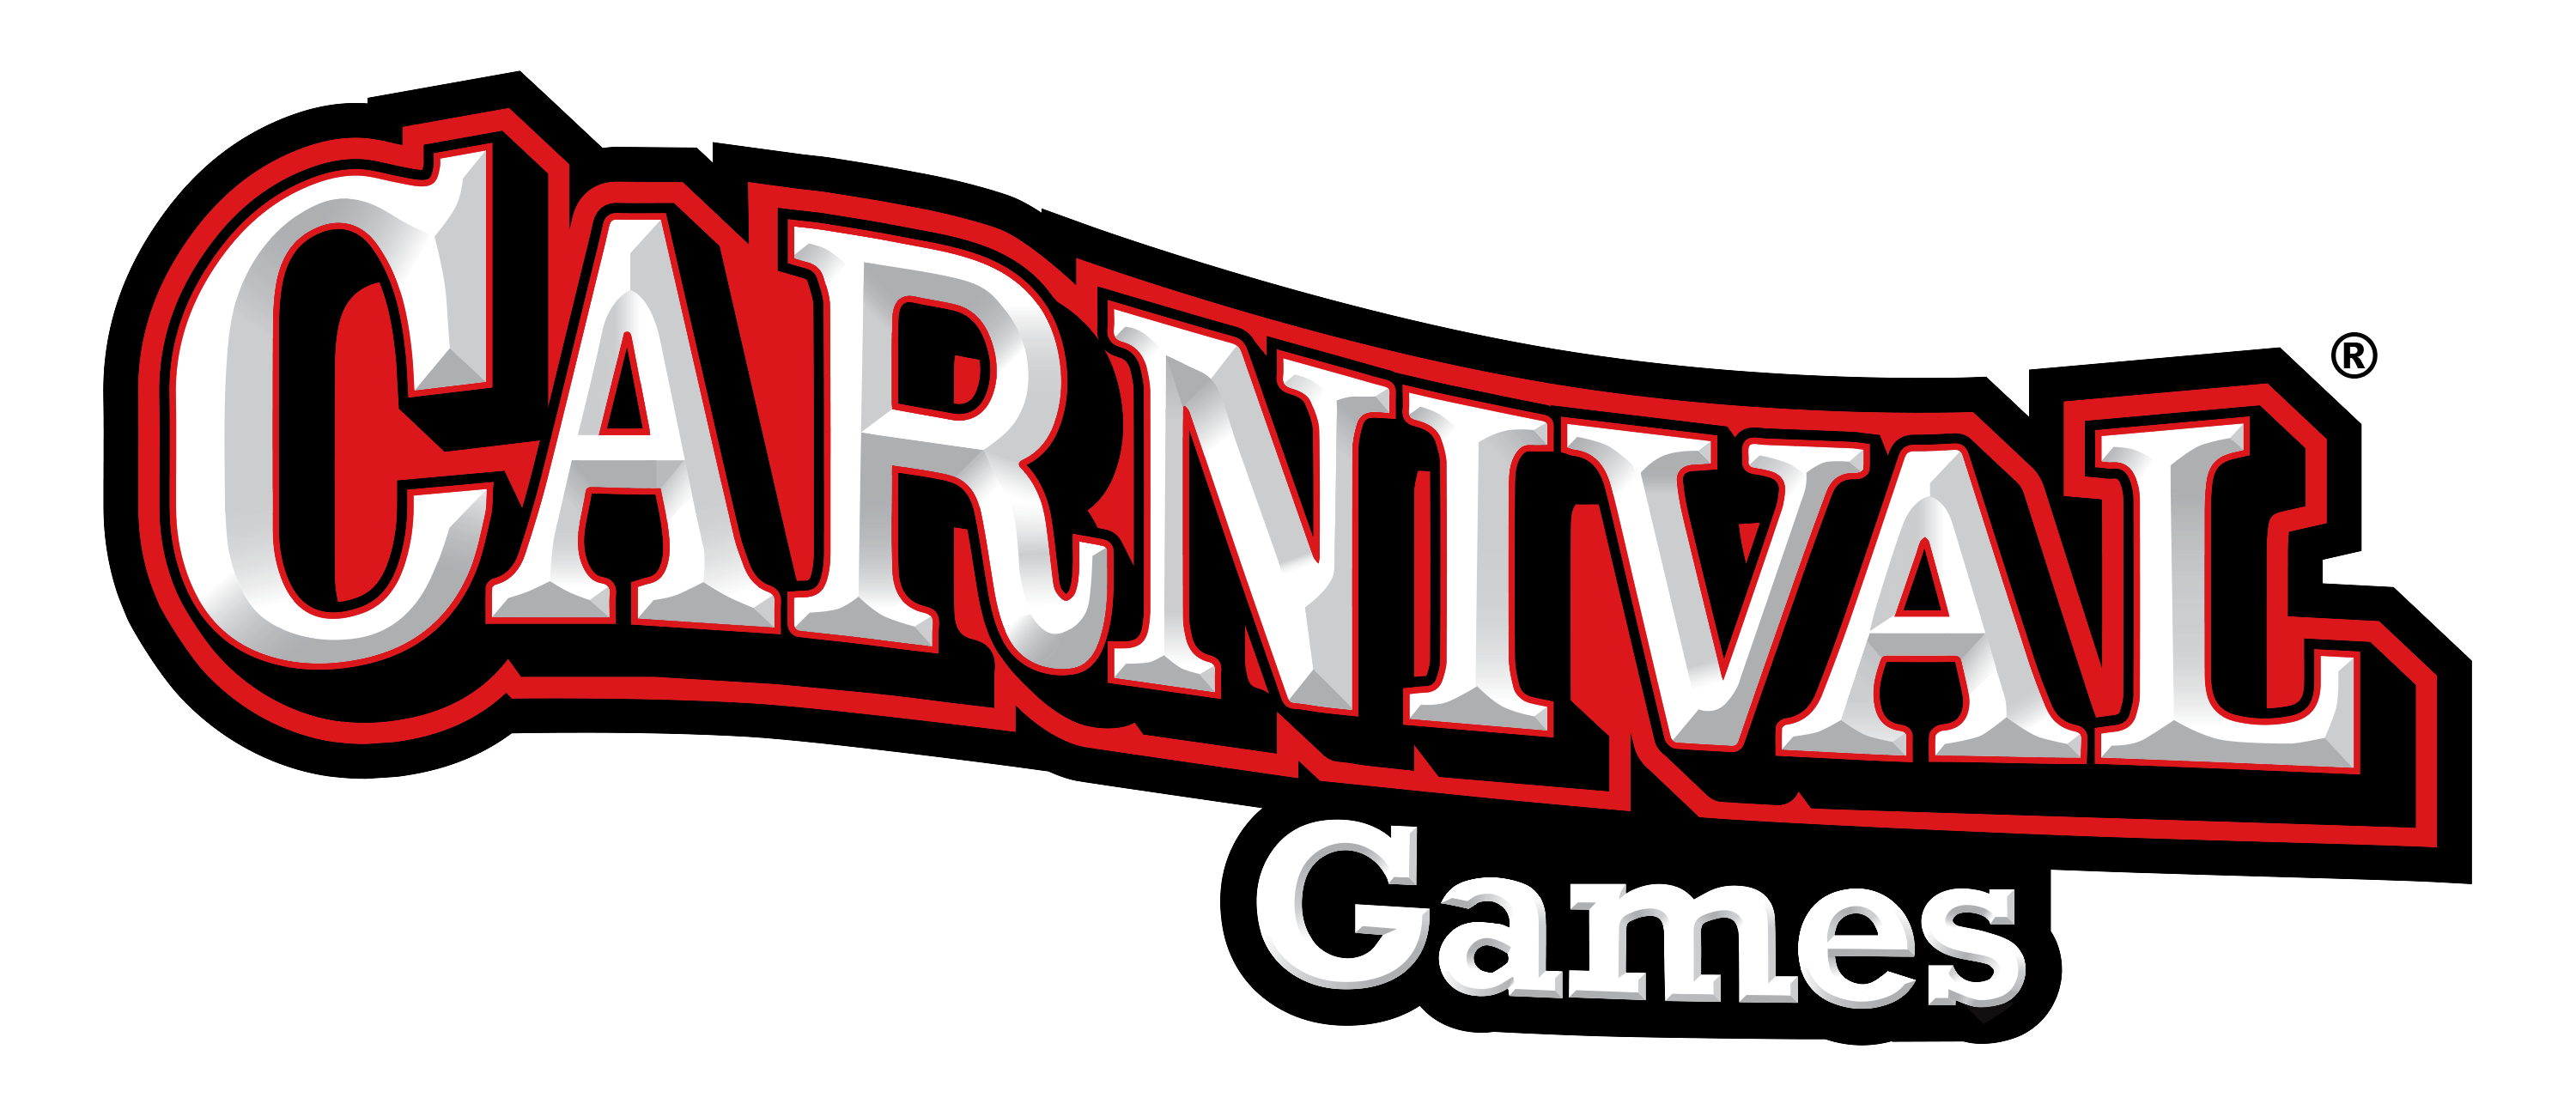 2K Brings Carnival Games to Switch [Press Release]